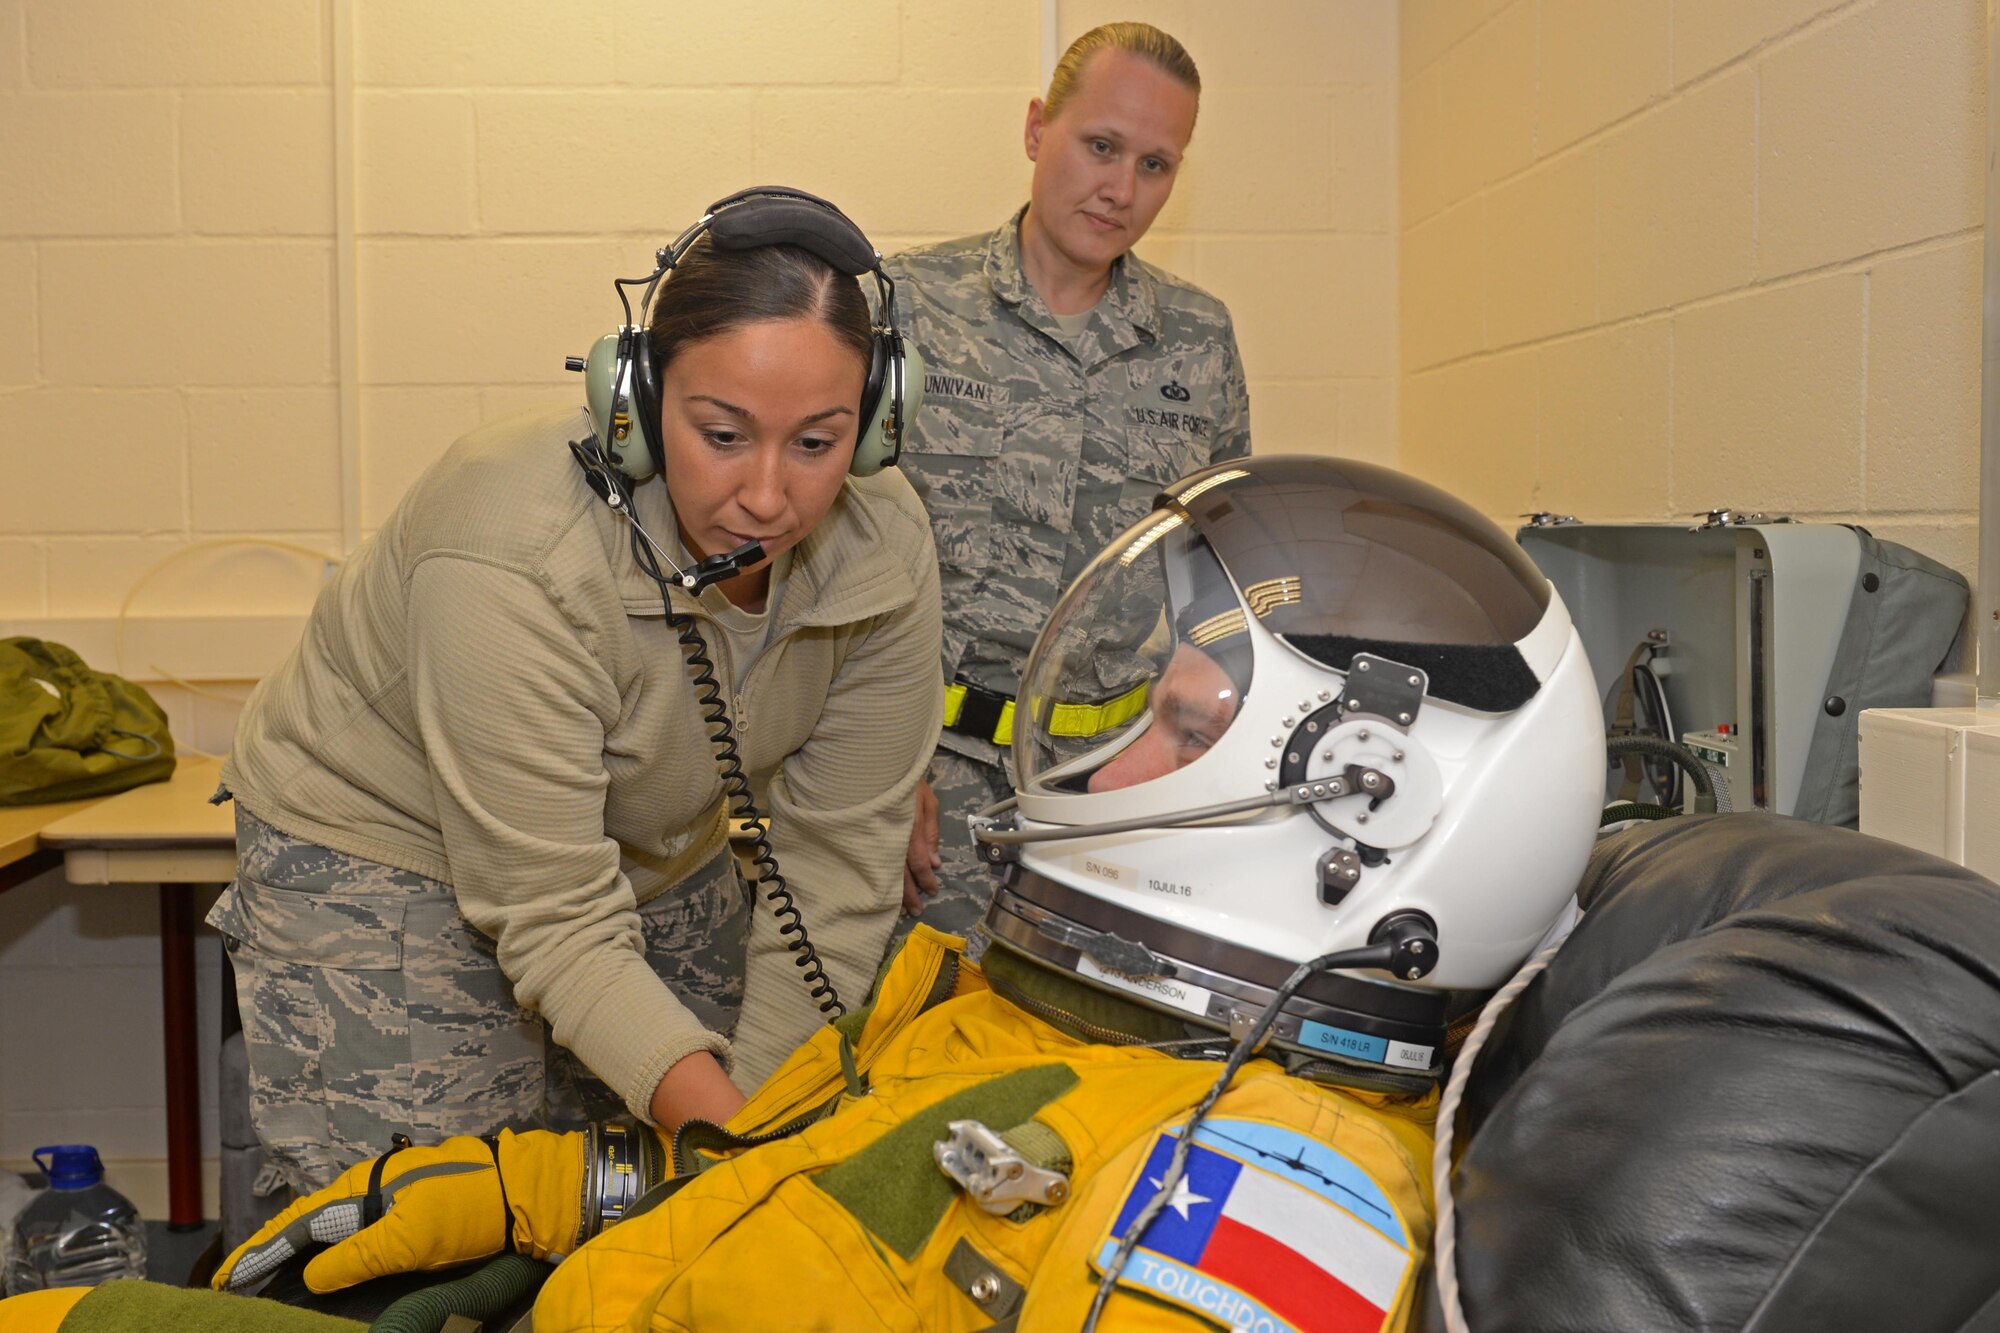 Staff Sgt. Julie Orellana (left), 9th Physiology Support Squadron launch and recovery technician, conducts a pre-flight inspection of a full-pressure suit June 9, 2016, at Royal Air Force Fairford, Gloucestershire, England. The suit allows U-2 pilots to safely fly at altitudes reaching 70,000 feet. (U.S. Air Force photo by Senior Airman Ramon A. Adelan)